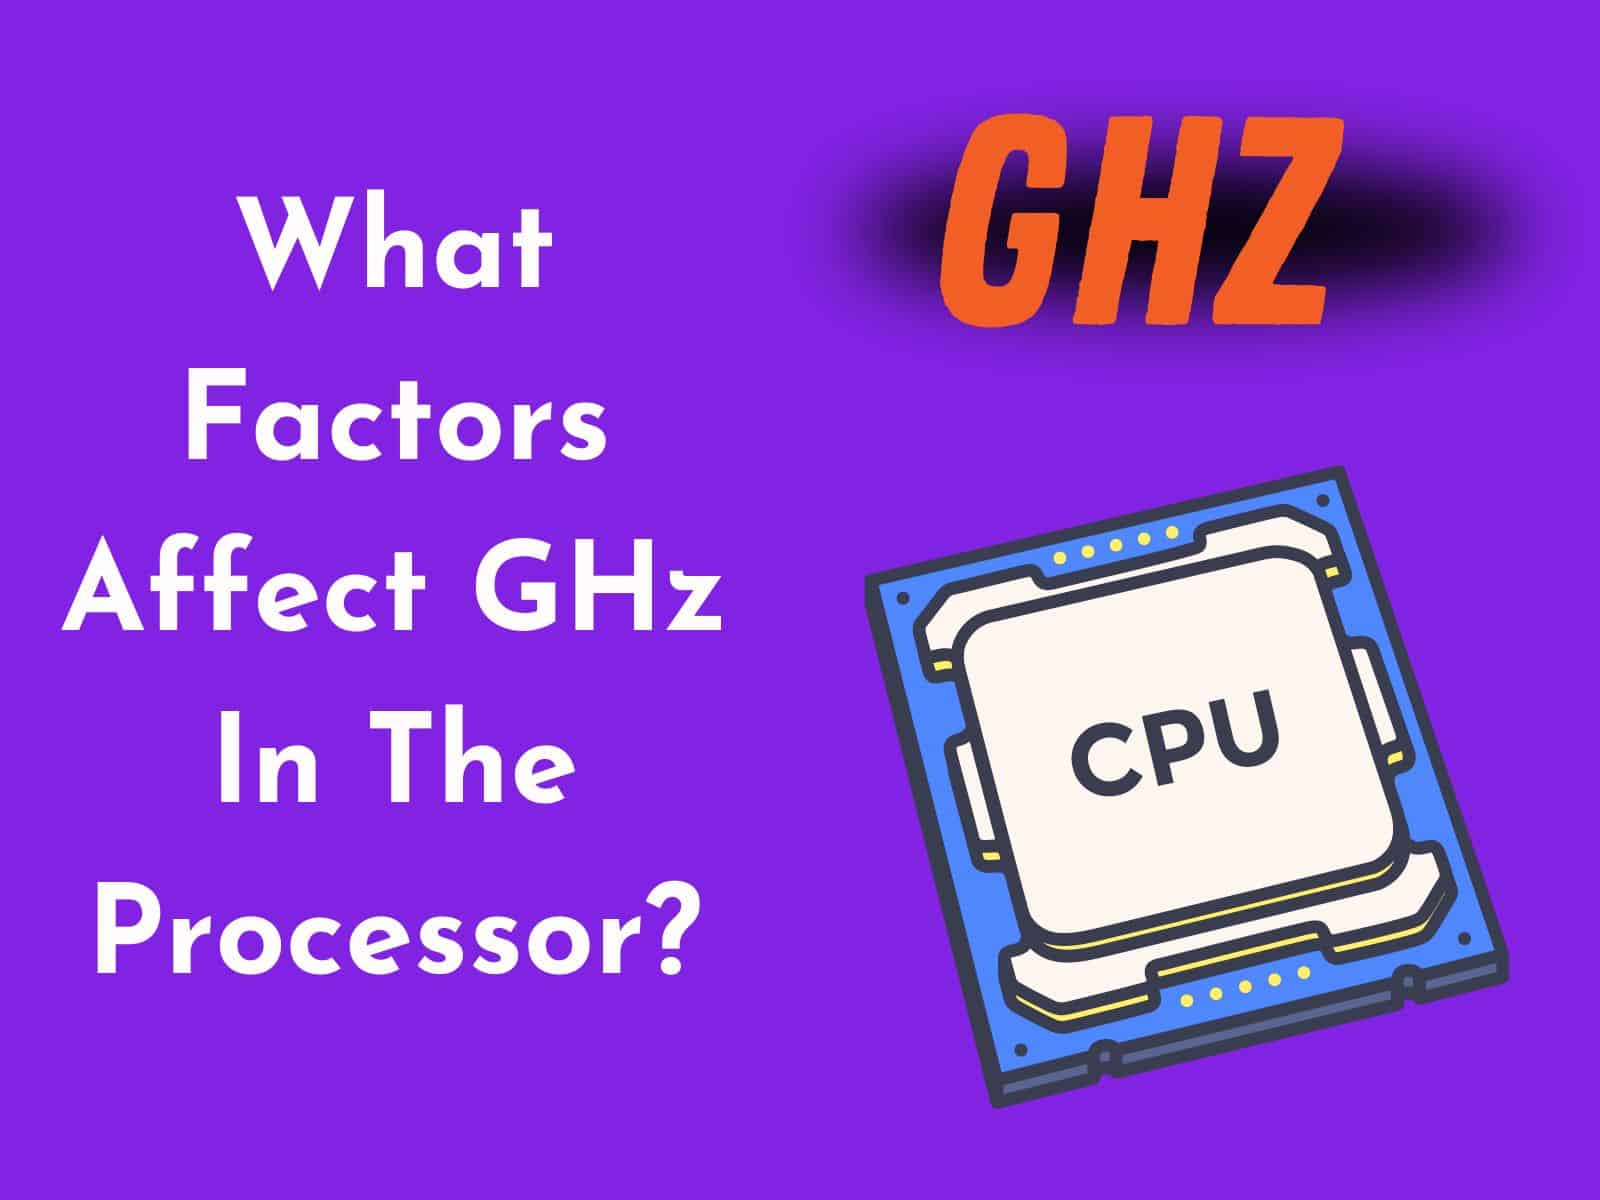 What Factors Affect GHz In The Processor